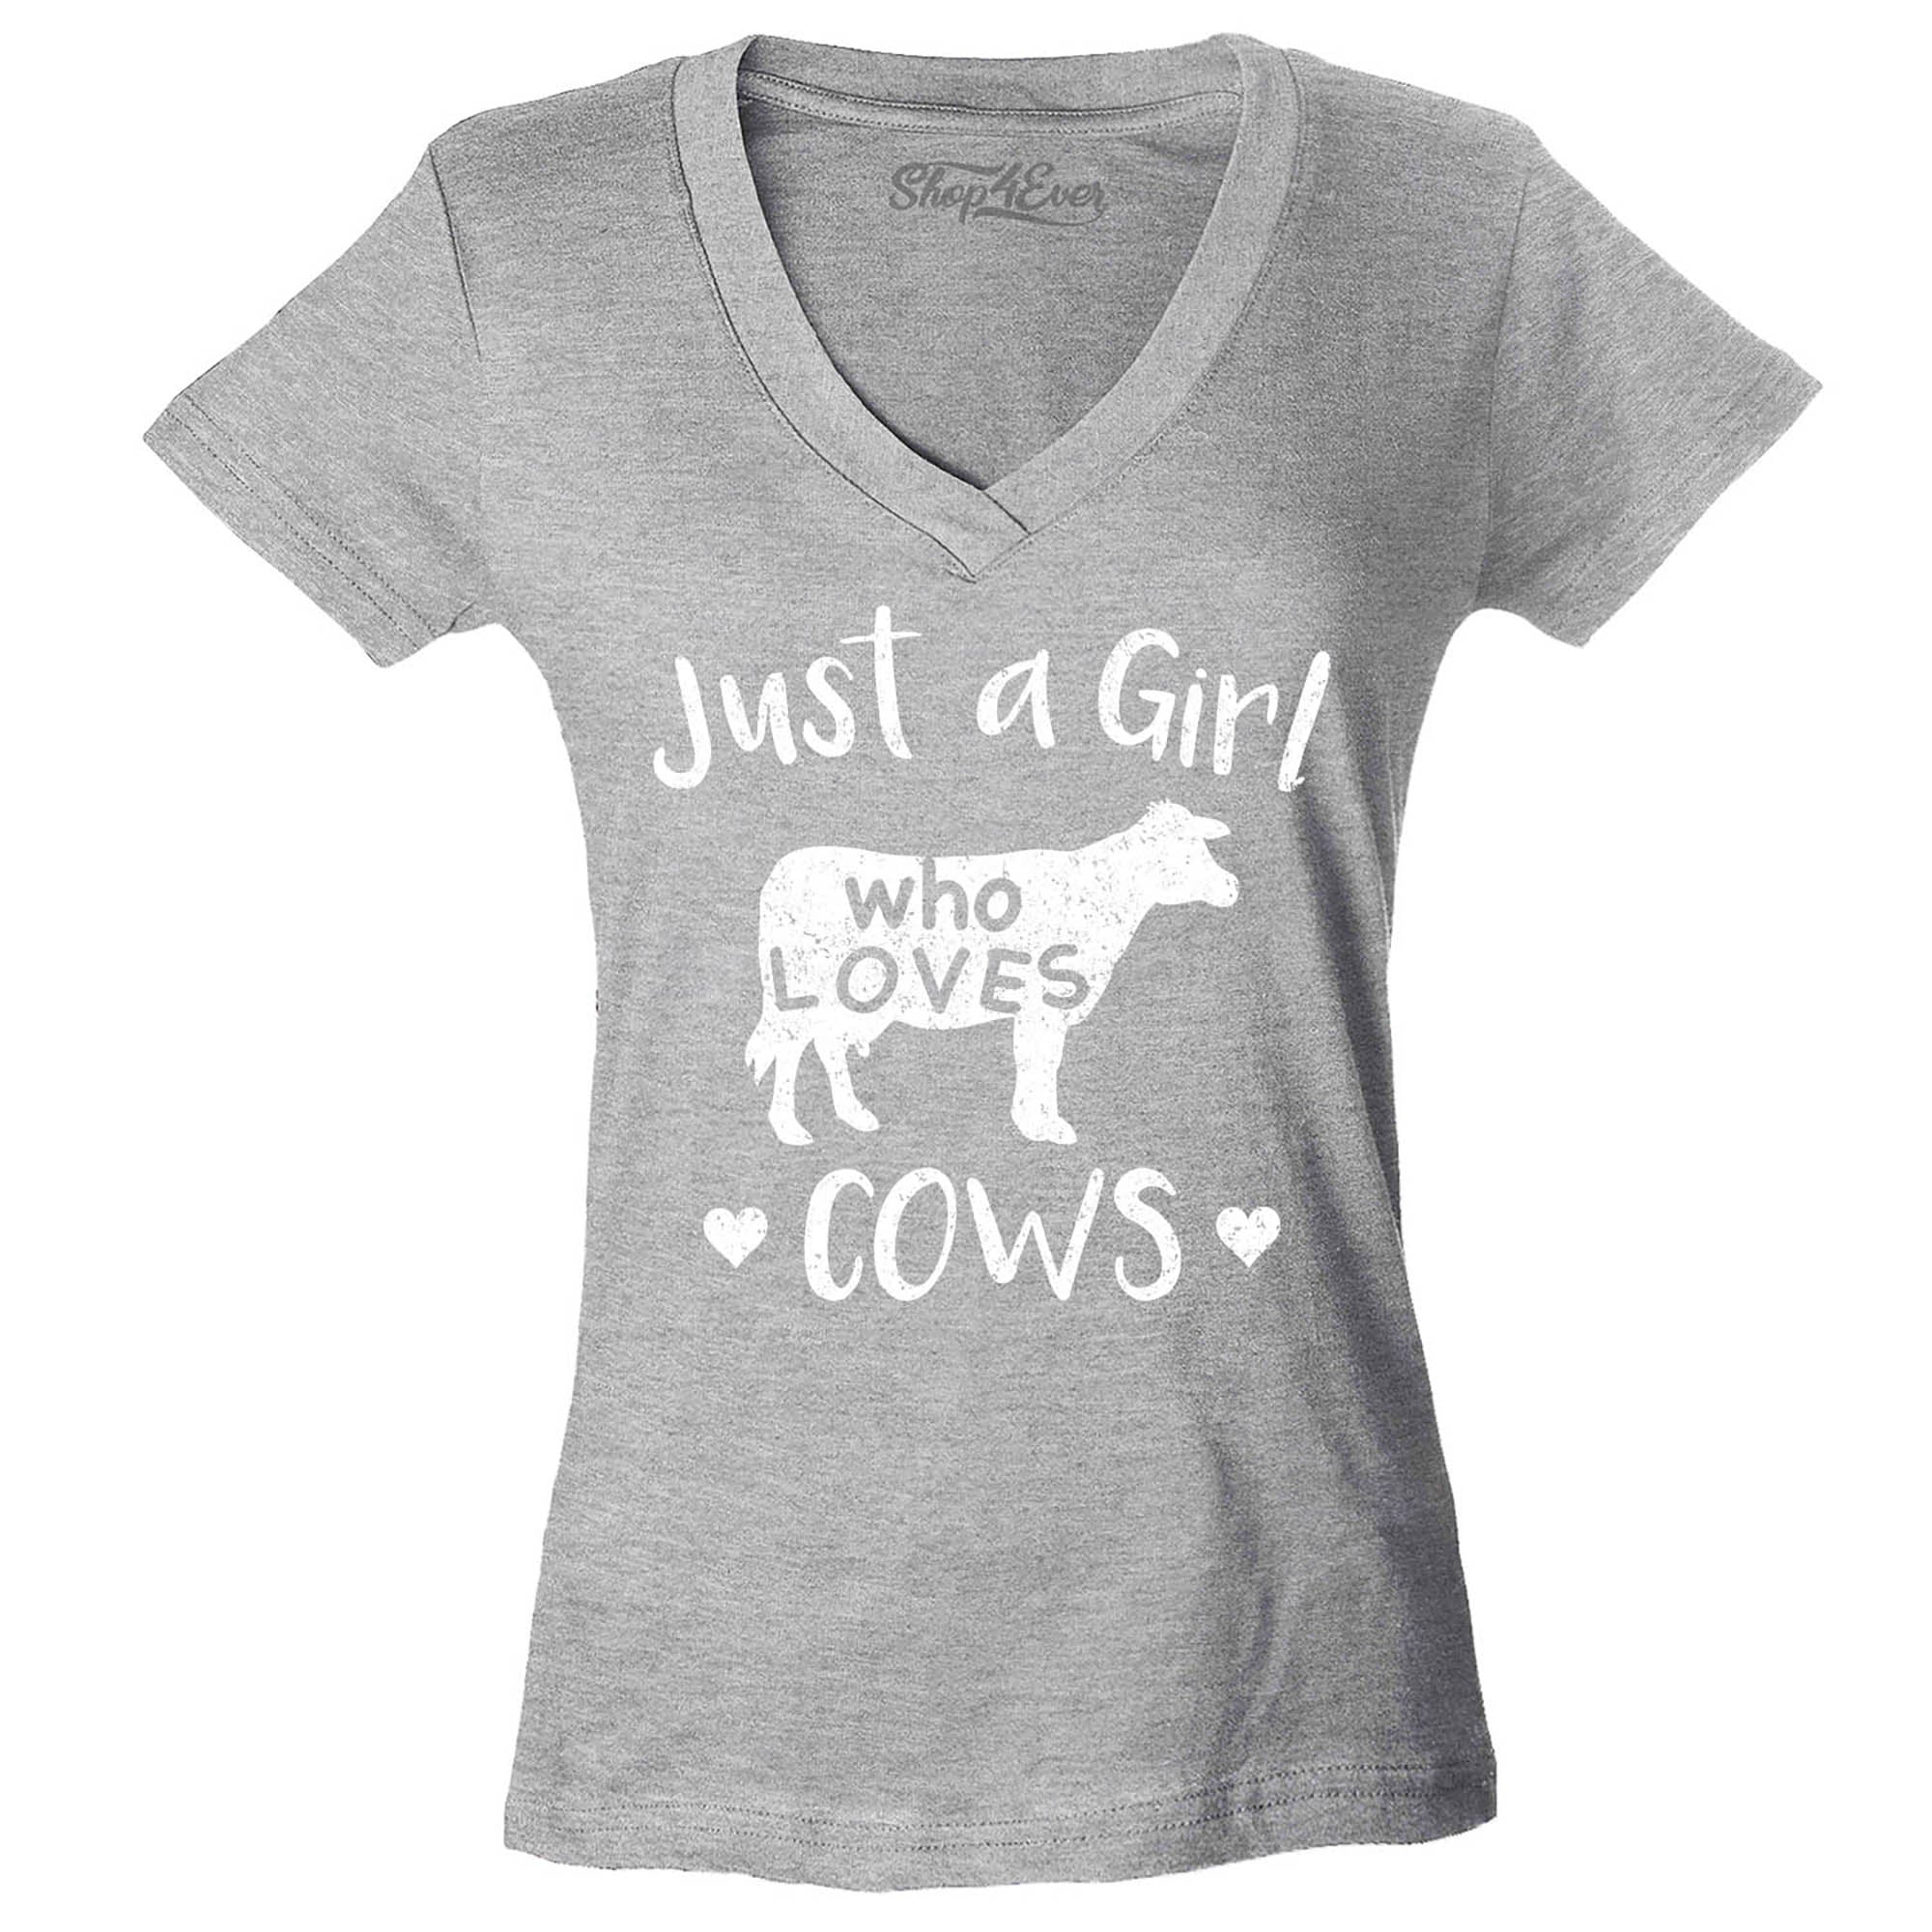 Just A Girl Who Loves Cows Women's V-Neck T-Shirt Slim Fit